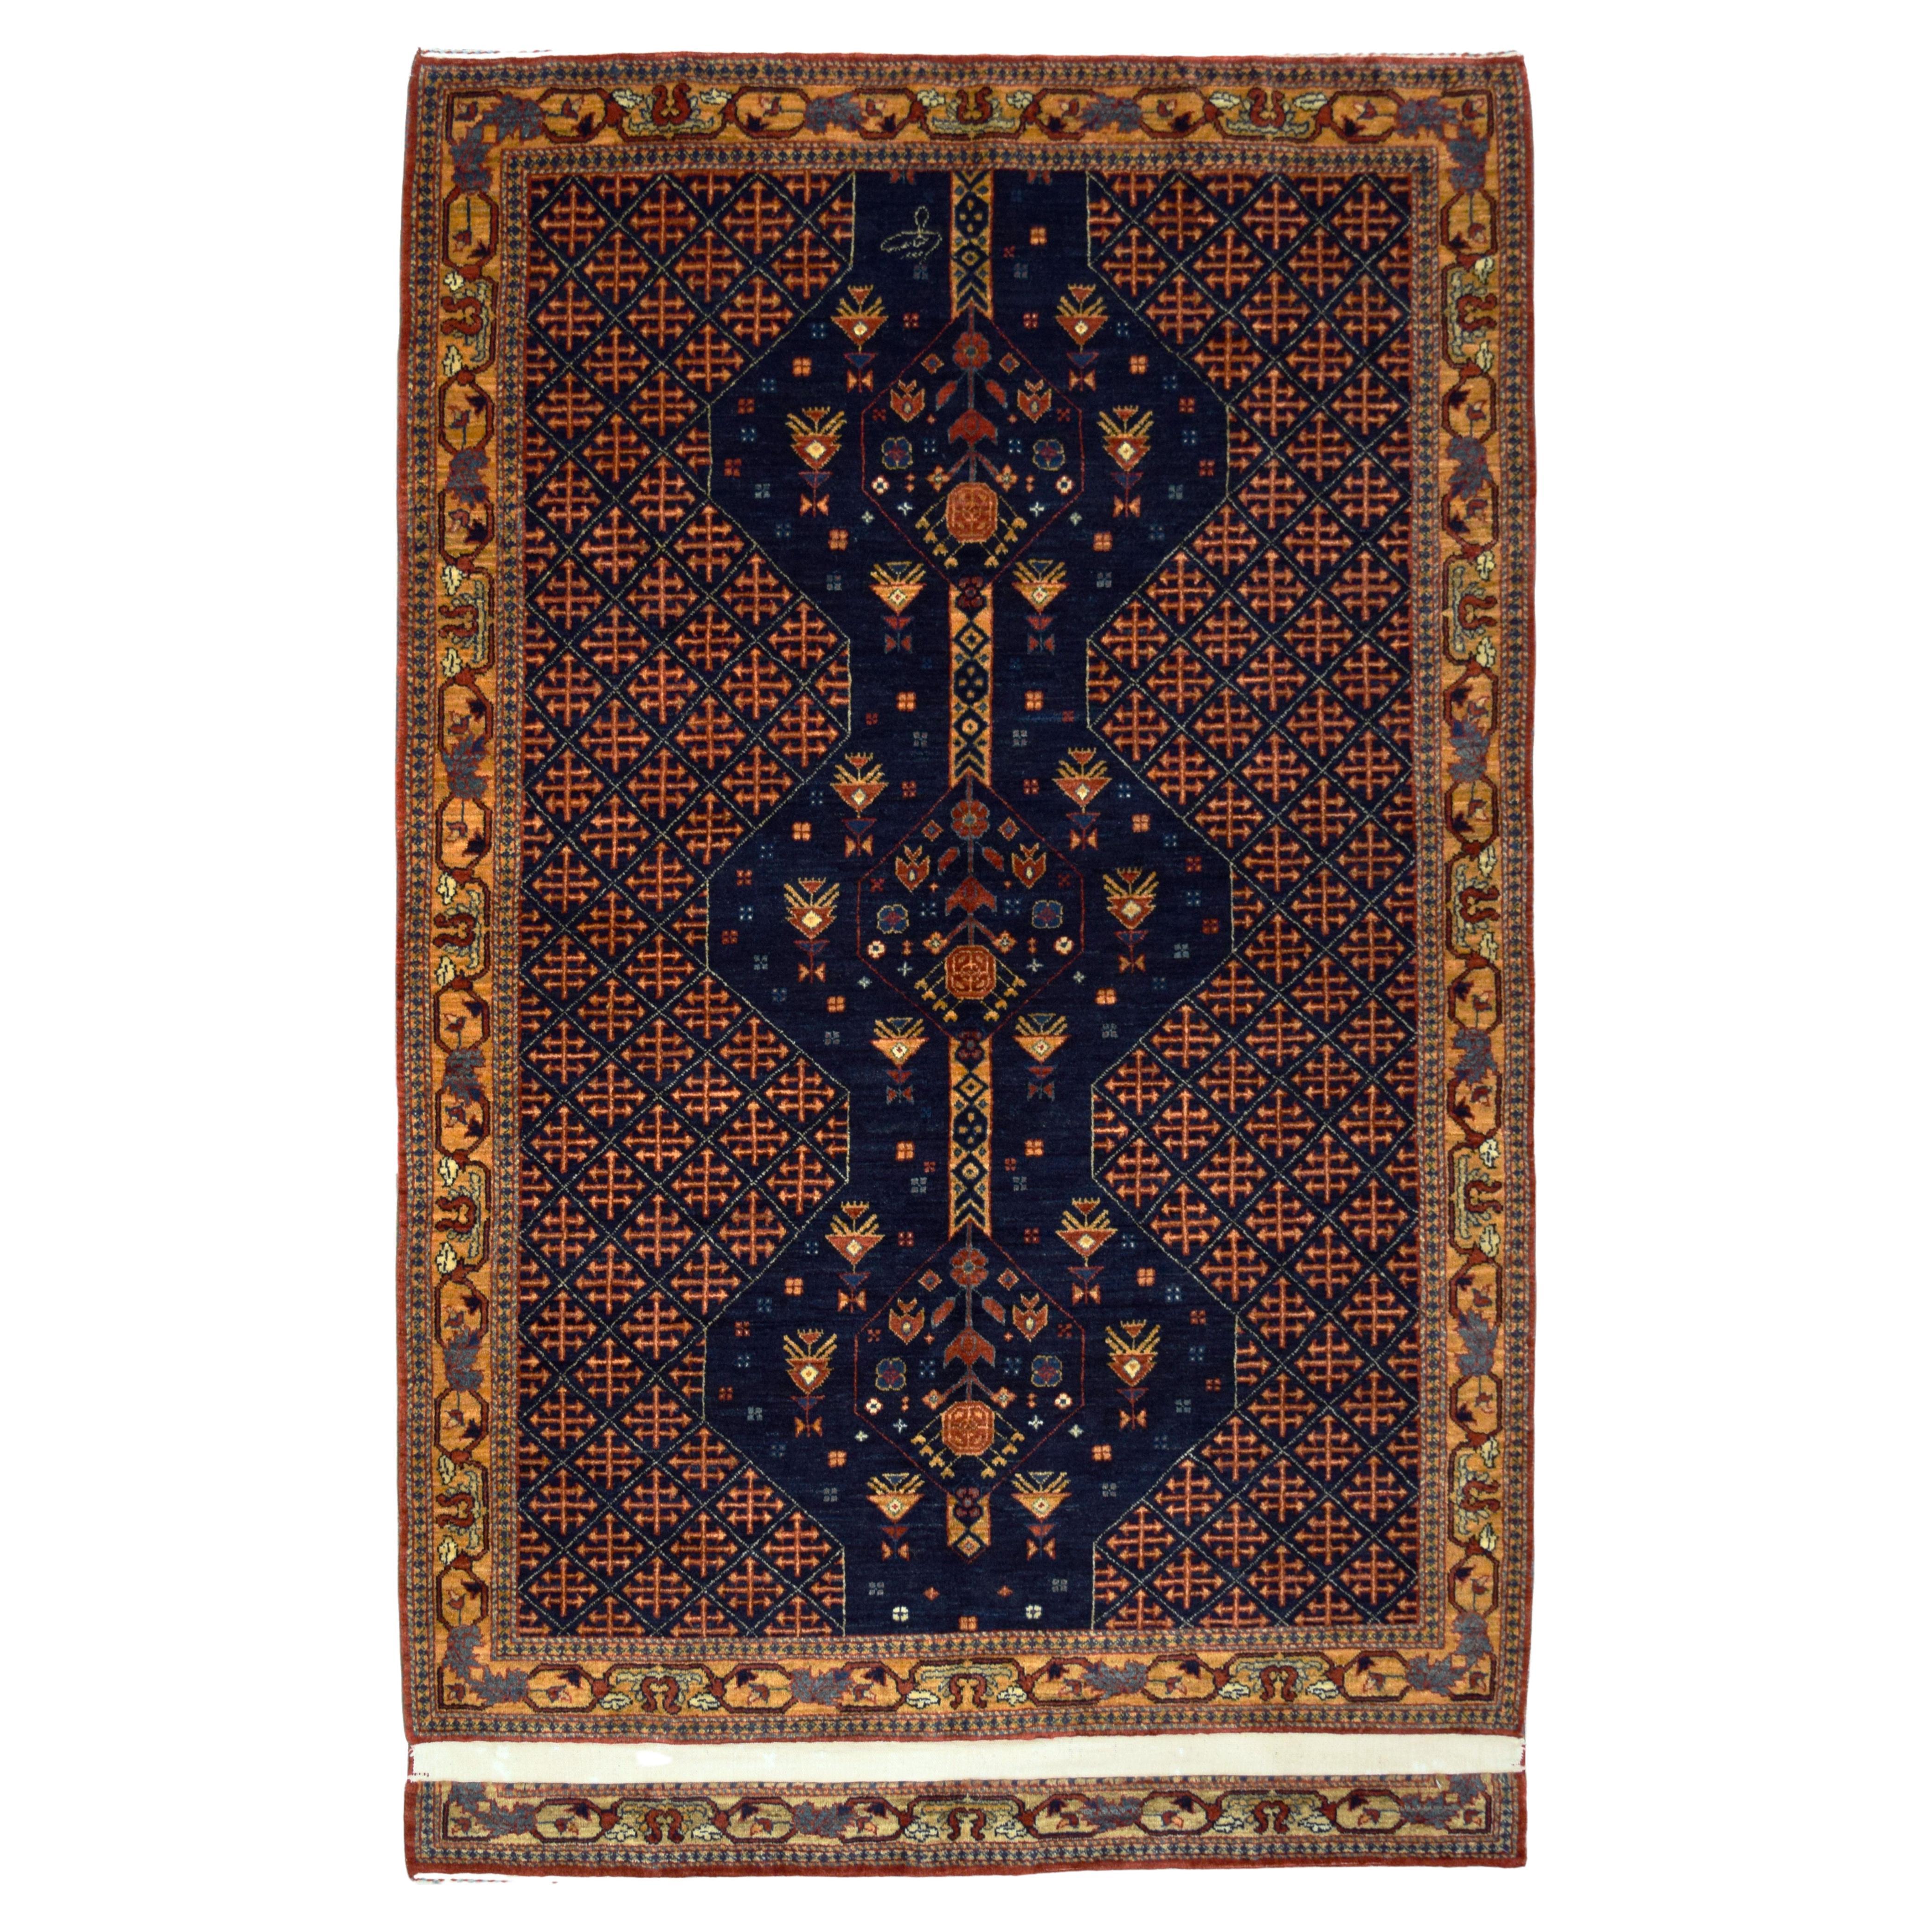 What are Persian rugs made of?